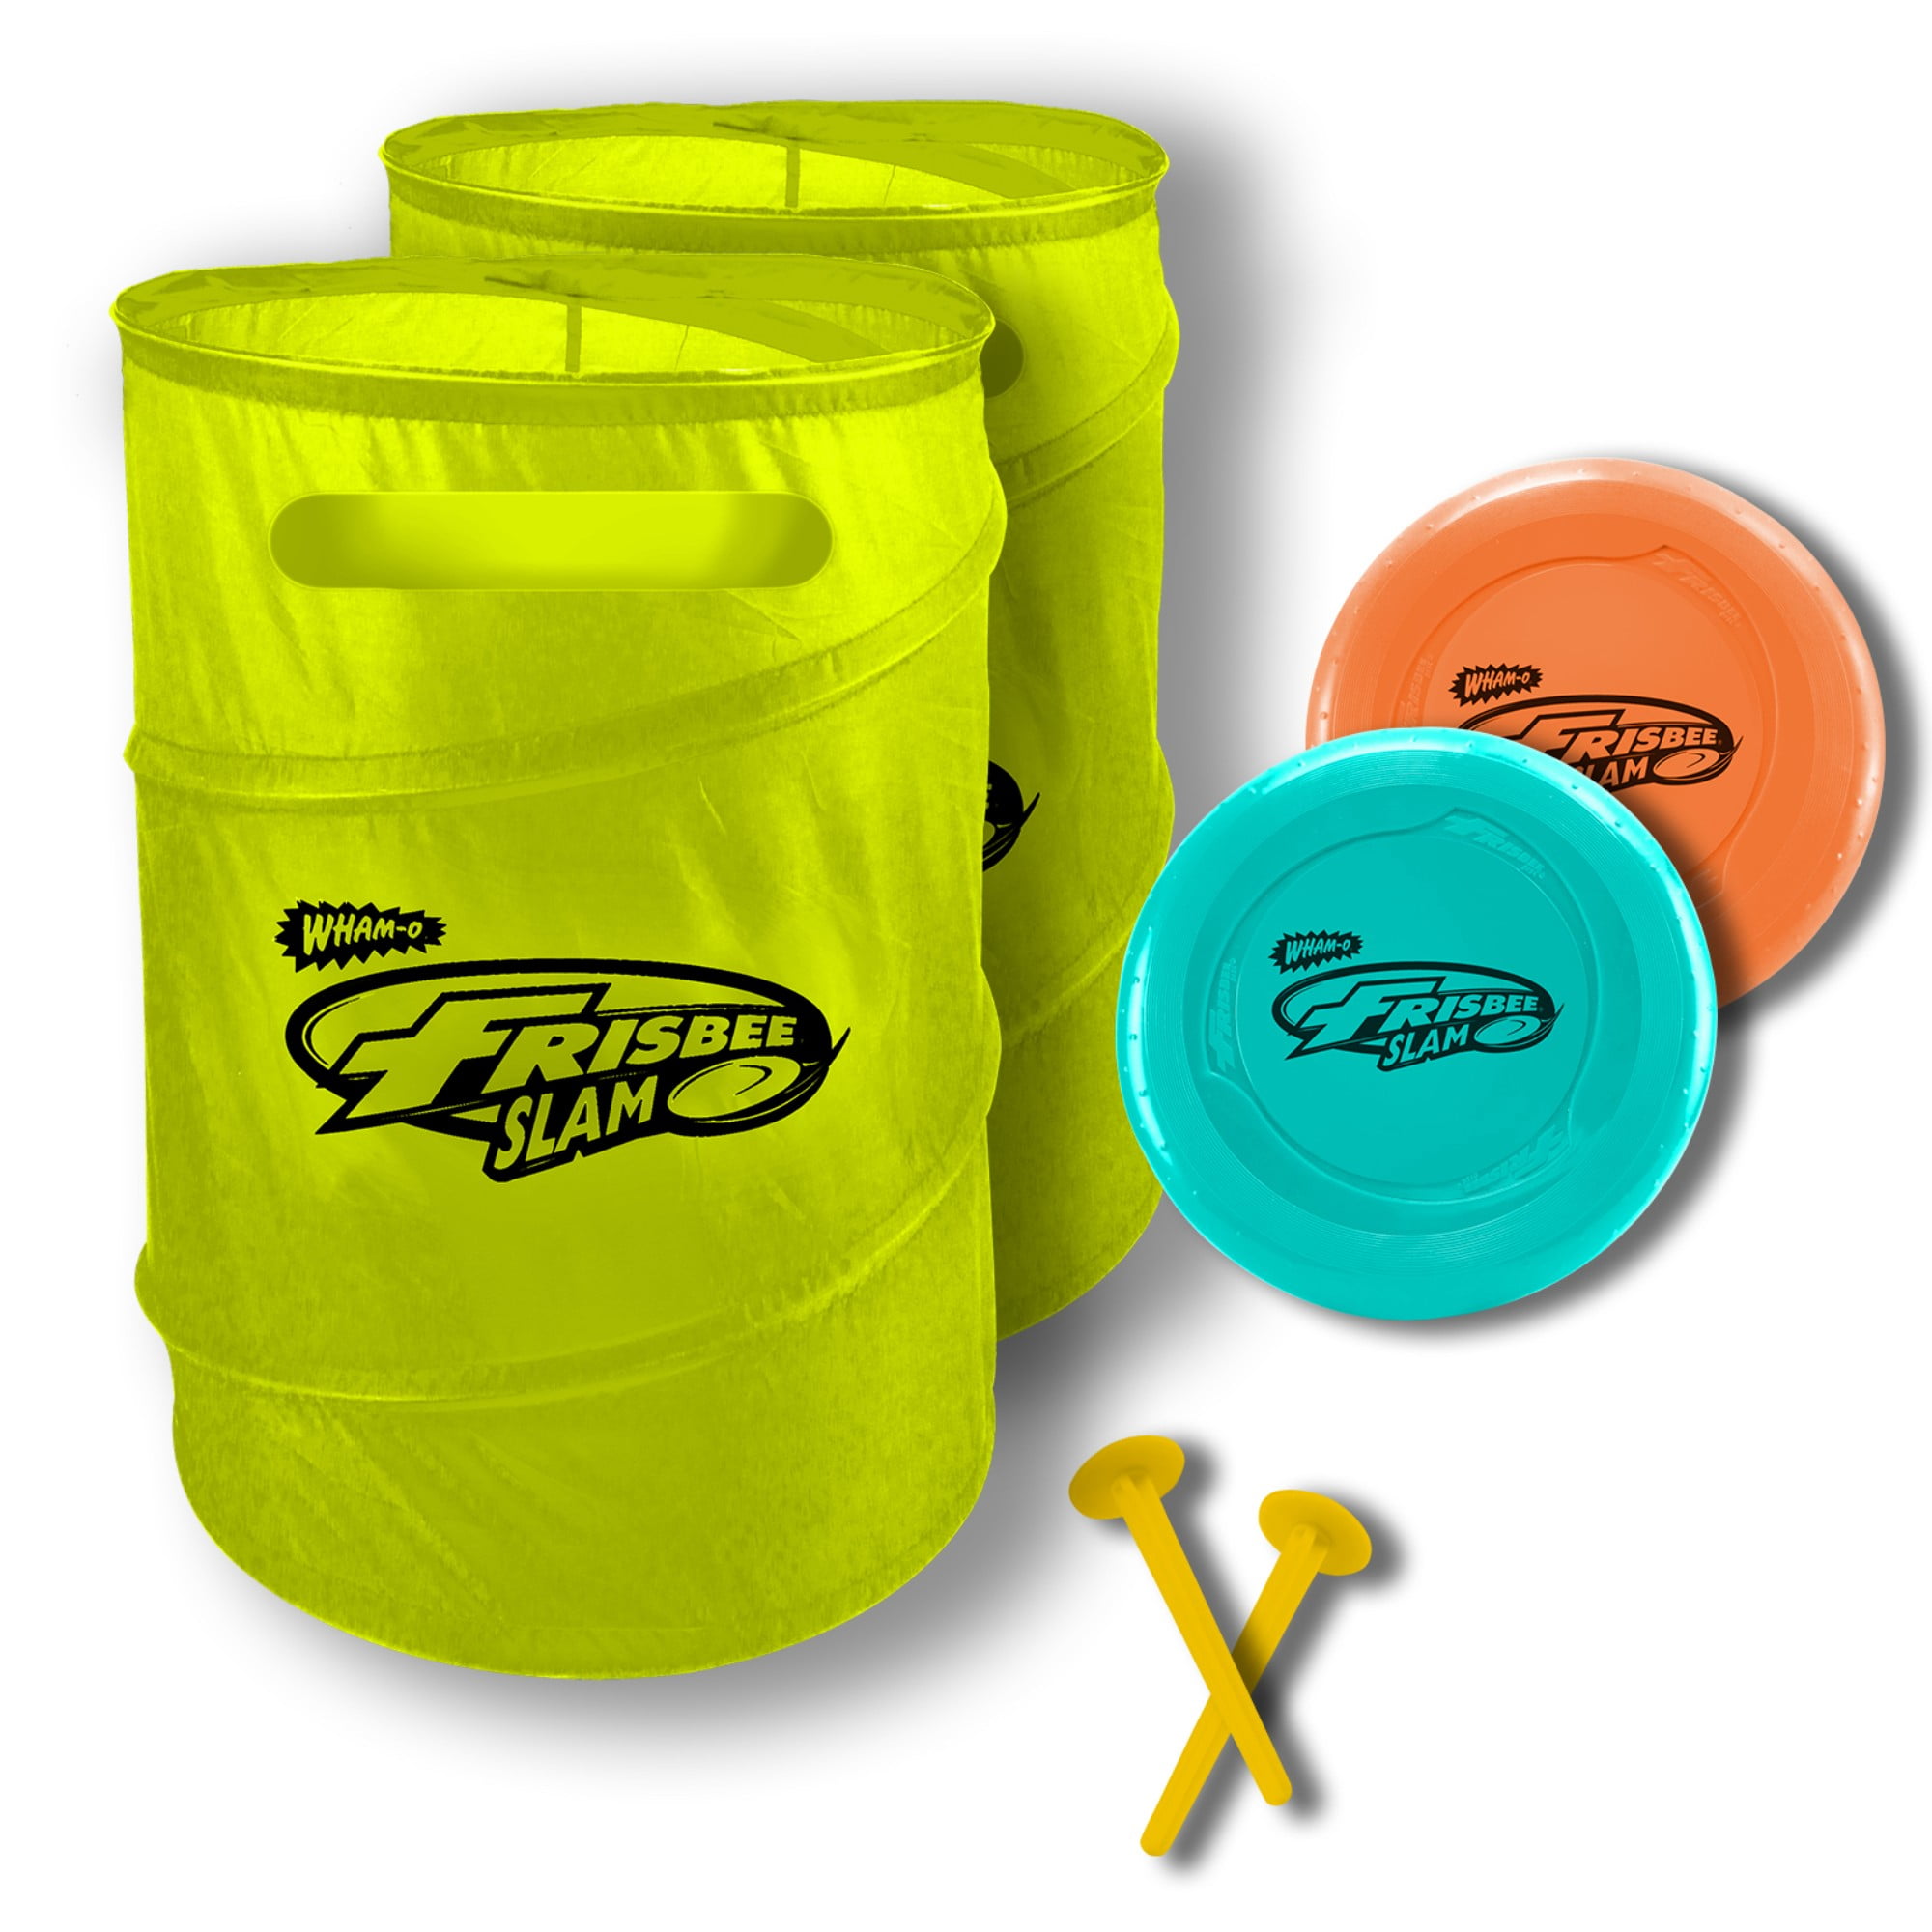 Collapsible Two Durable Weather Resistant Material- Includes 2 Pop-Up Targets and 2 Disc Set Frisbee Wham-O Slam Outdoor Game